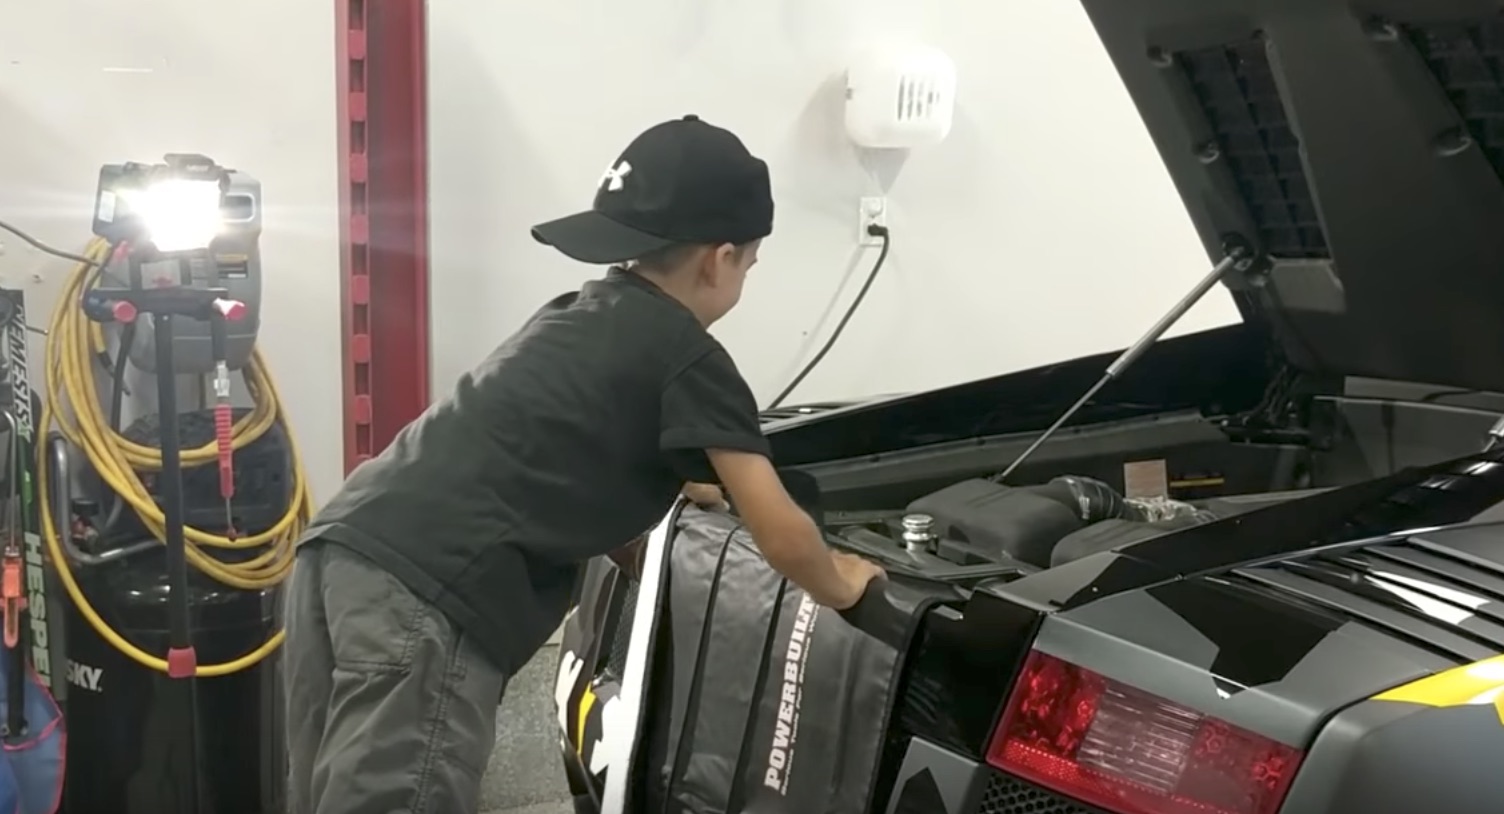 5-year old shows you how to change the oil in a Lamborghini